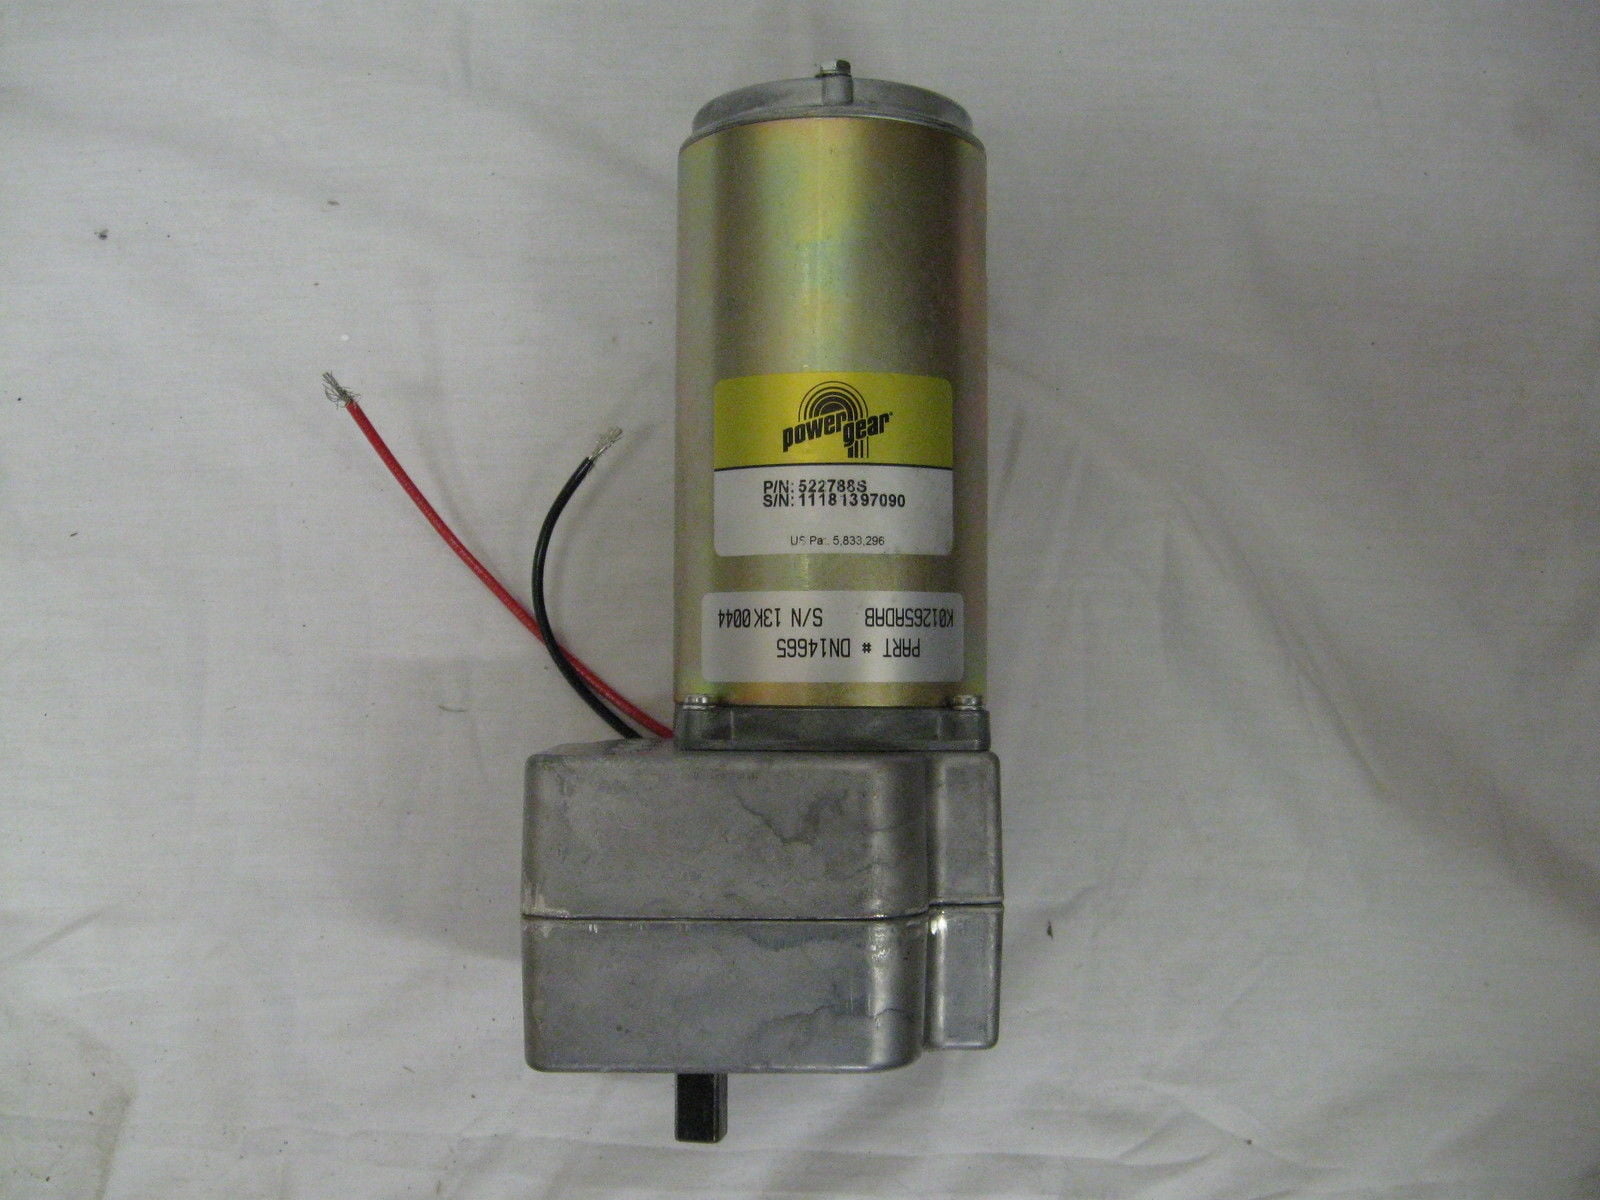 Power Gear 522788S RV Slide Out Motor Replaces DN14665 - Lippert 386325 Power Gear Slide Out Fault Code